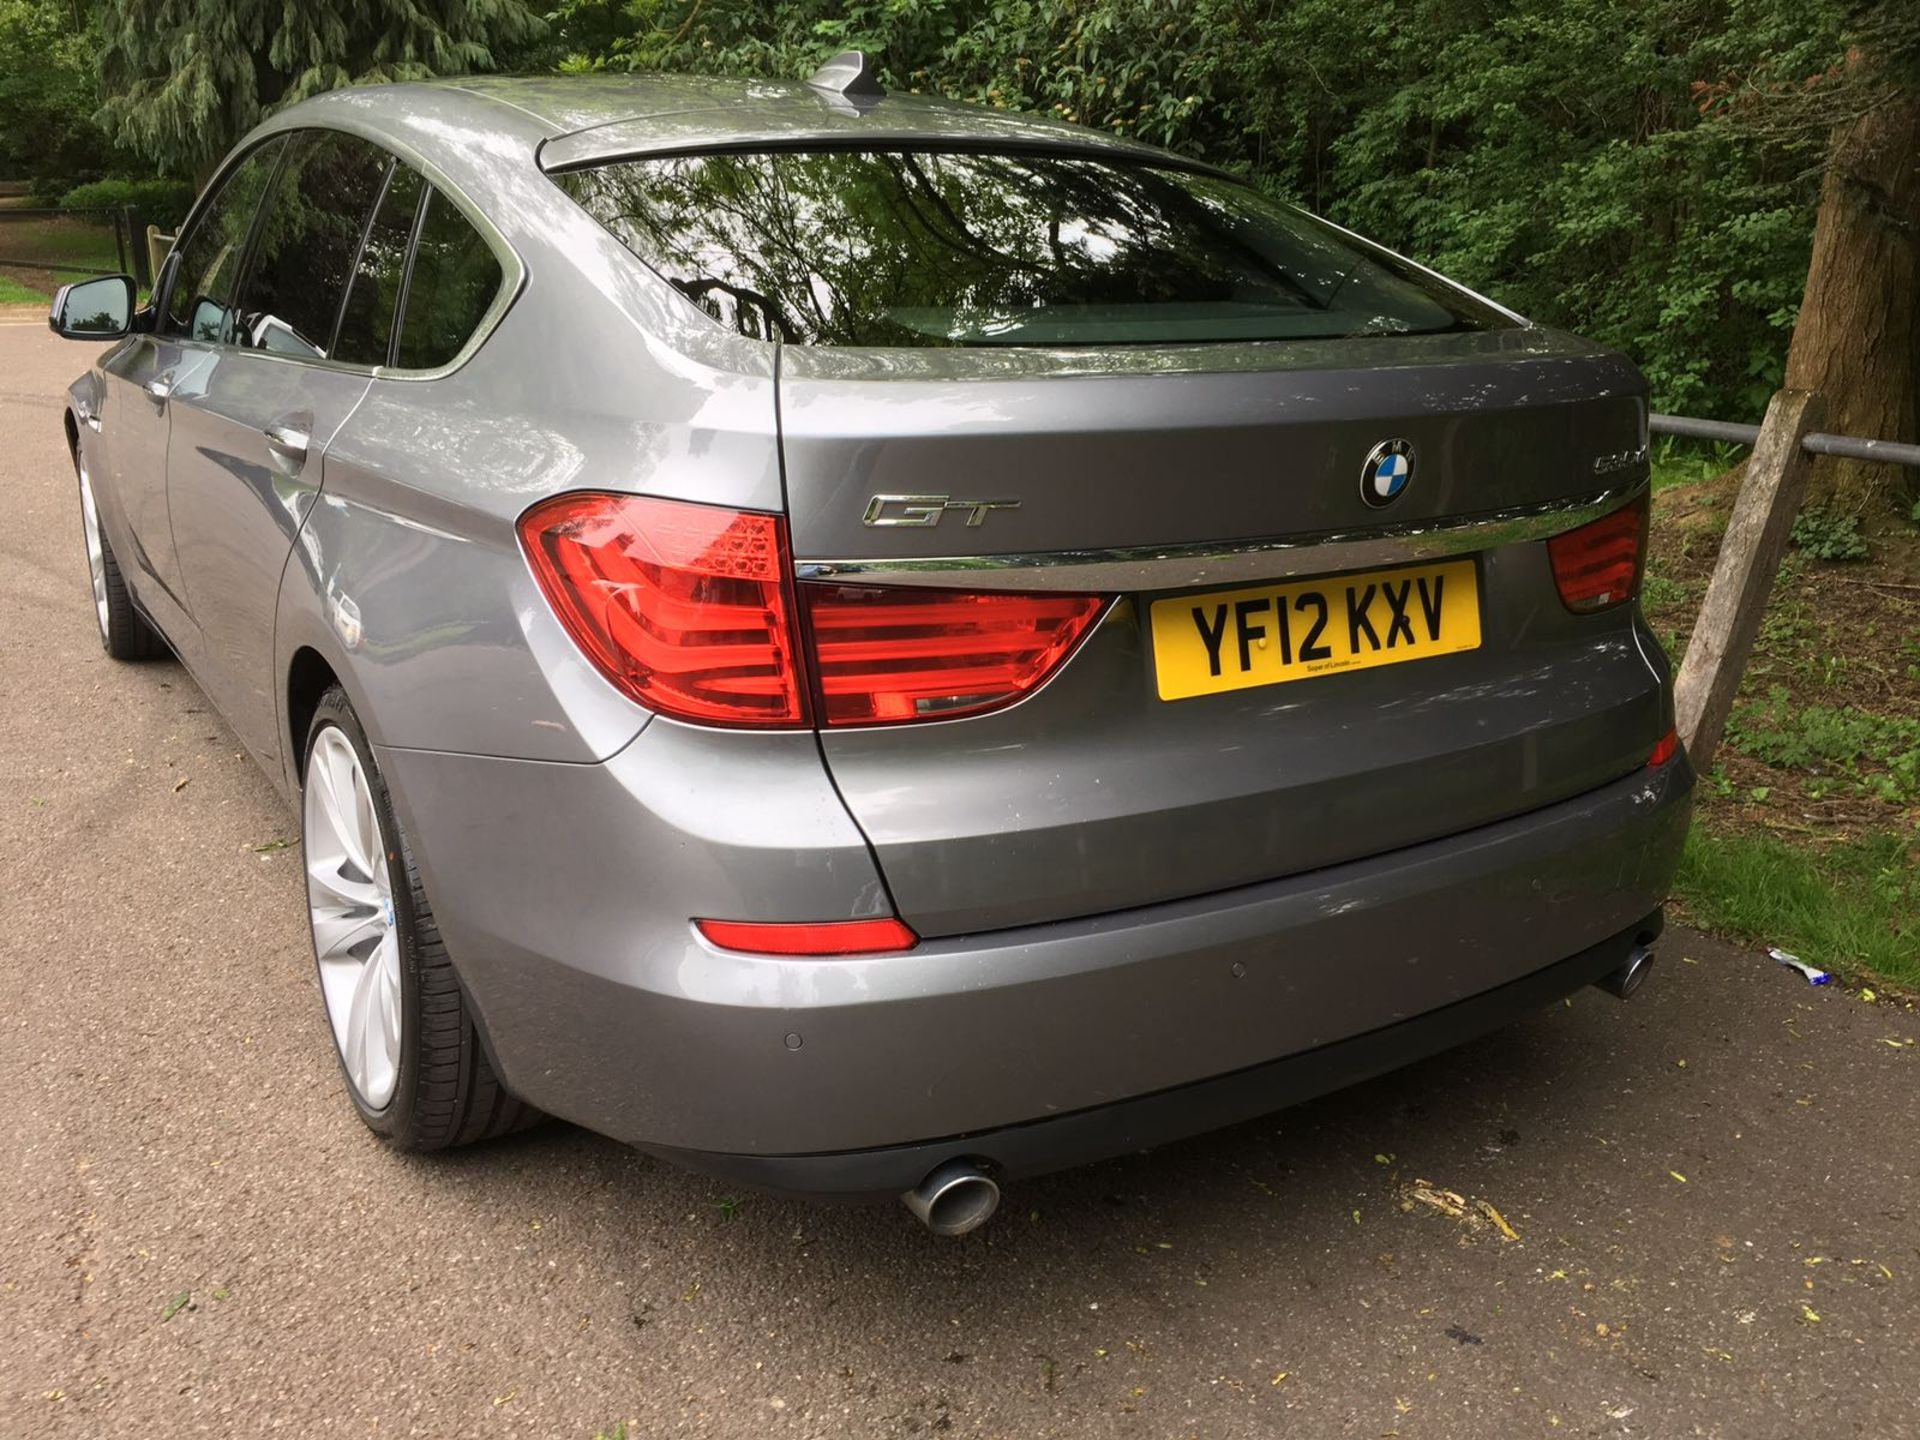 BMW 535D GT Gran Turismo 2012/12. 57,000 Miles. Automatic Gearbox - Image 7 of 19